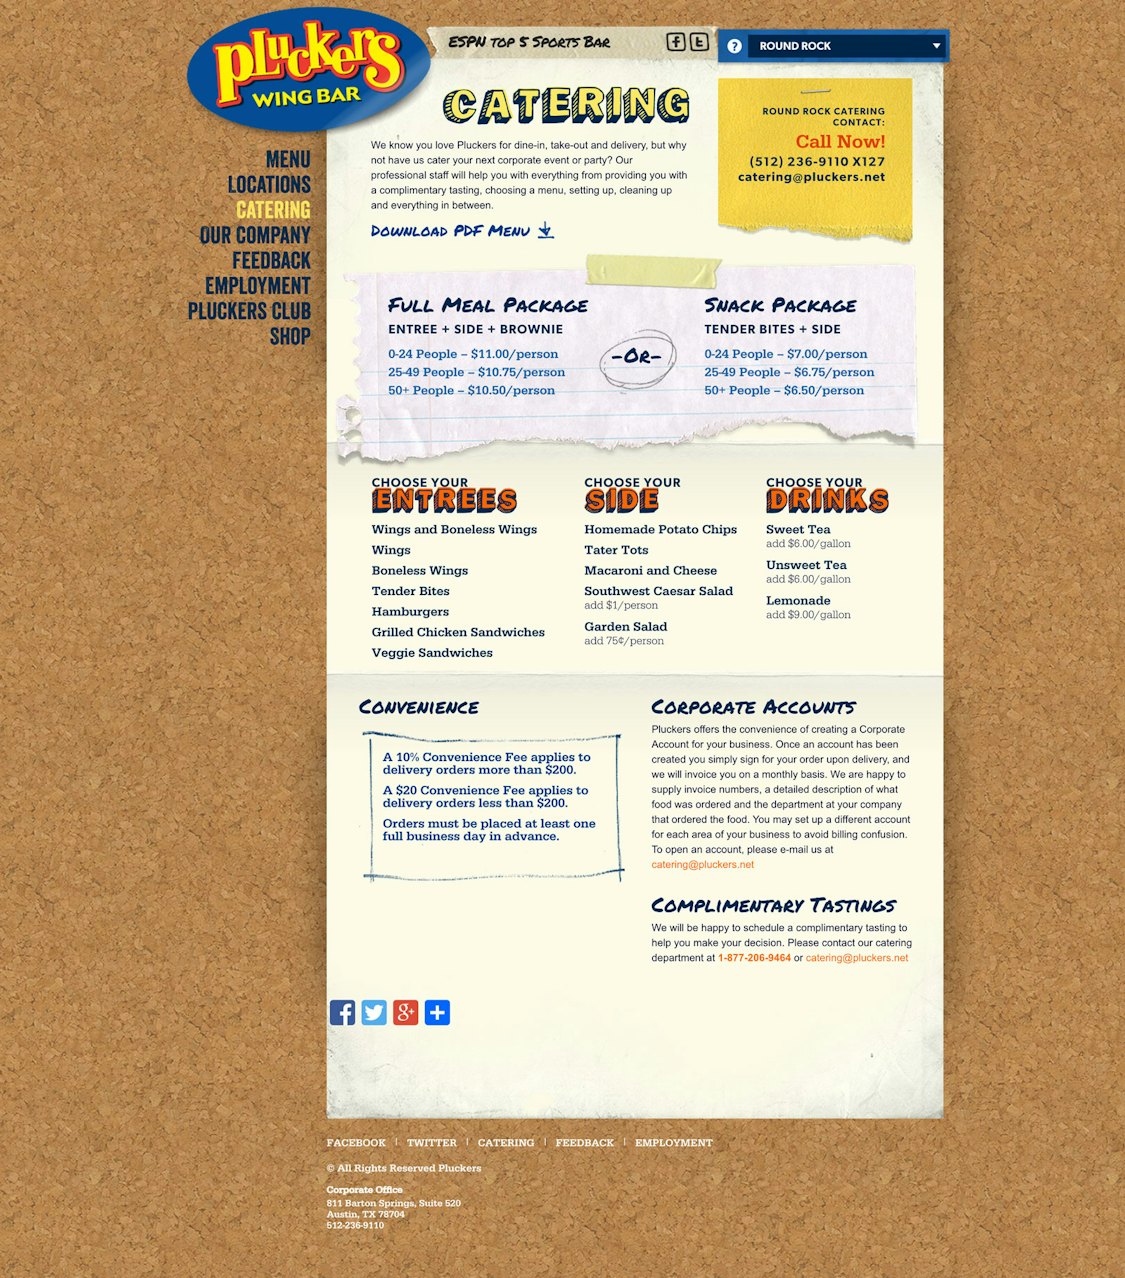 Pluckers screenshot 1 - Restaurant website design for the Catering page - Includes Full Meal Package, Snack Package, and Corporate account information